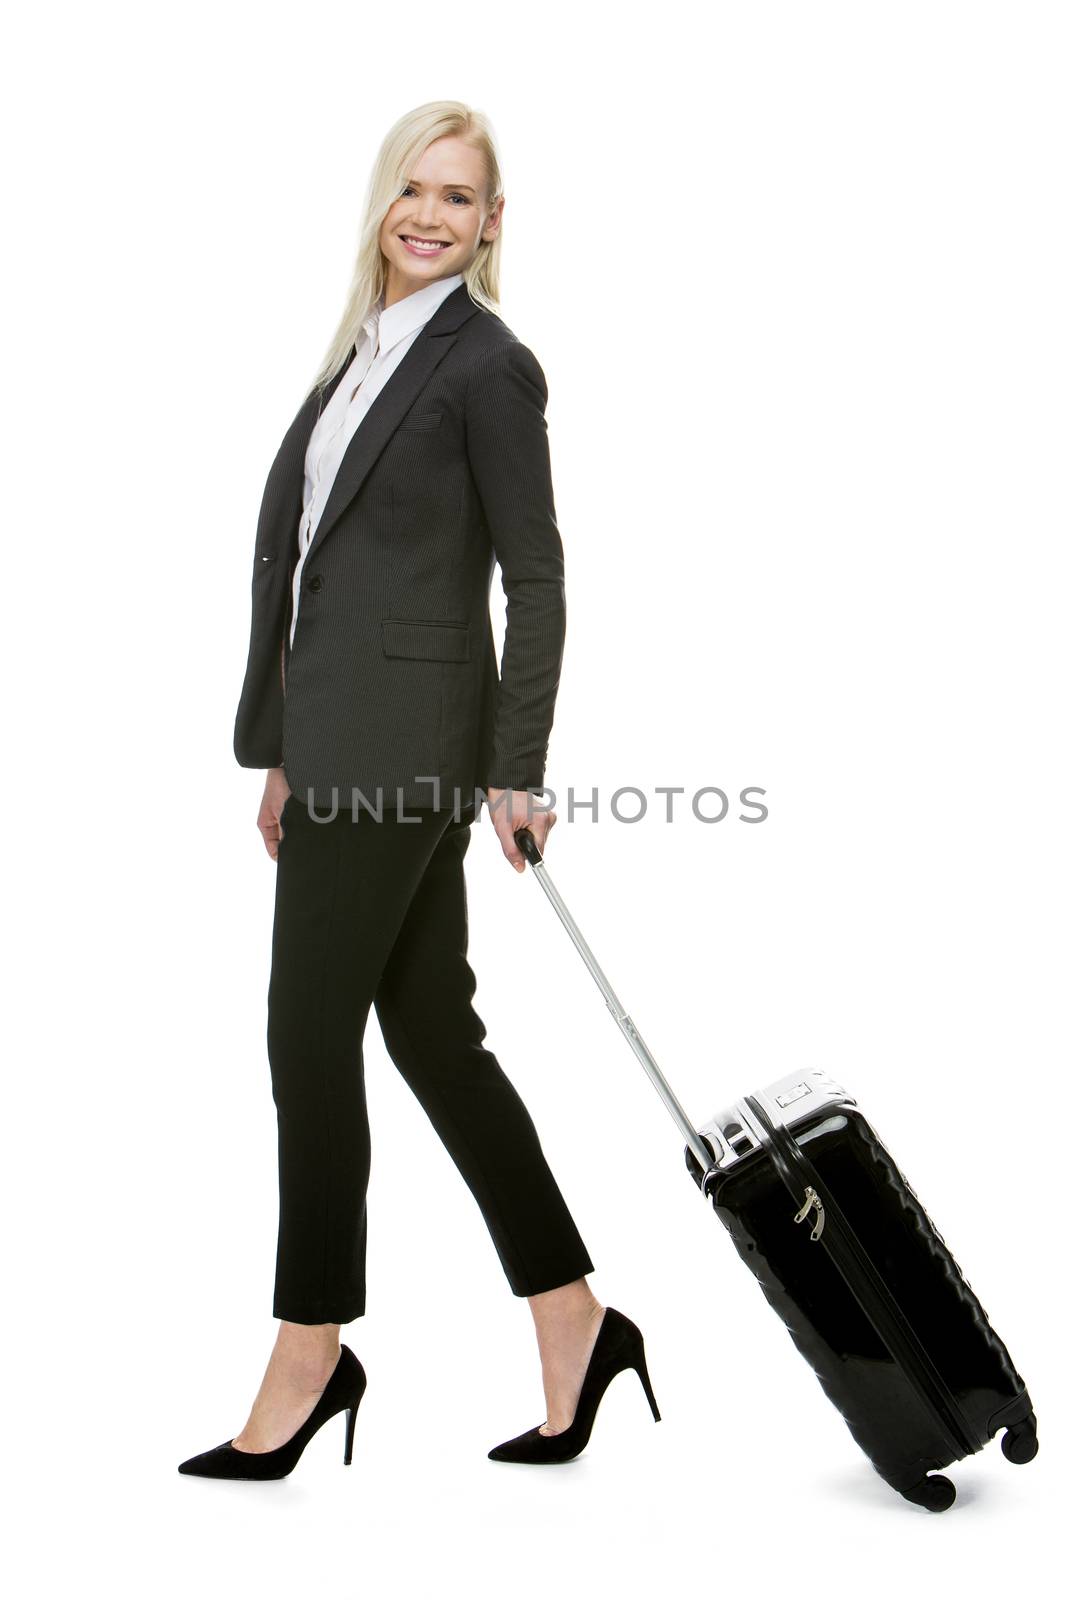 businesswoman with suitcase by Flareimage